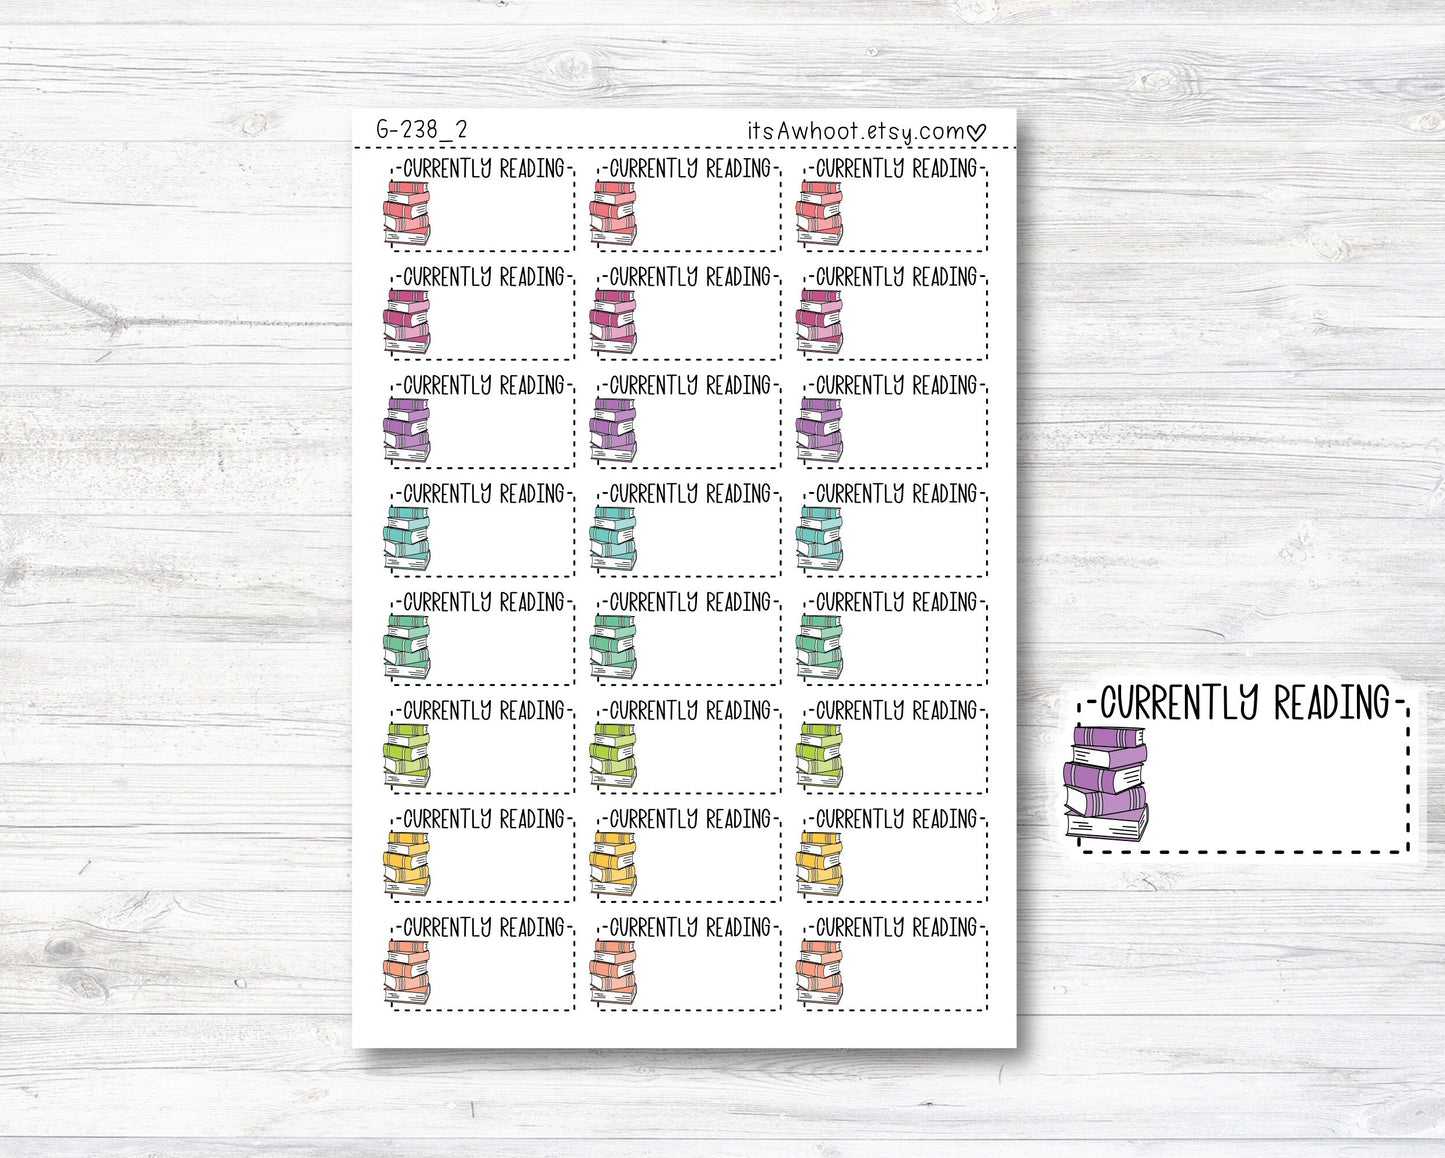 CURRENTLY READING with Book icon Box Label Planner Stickers - LARGE .8" (G238_2)